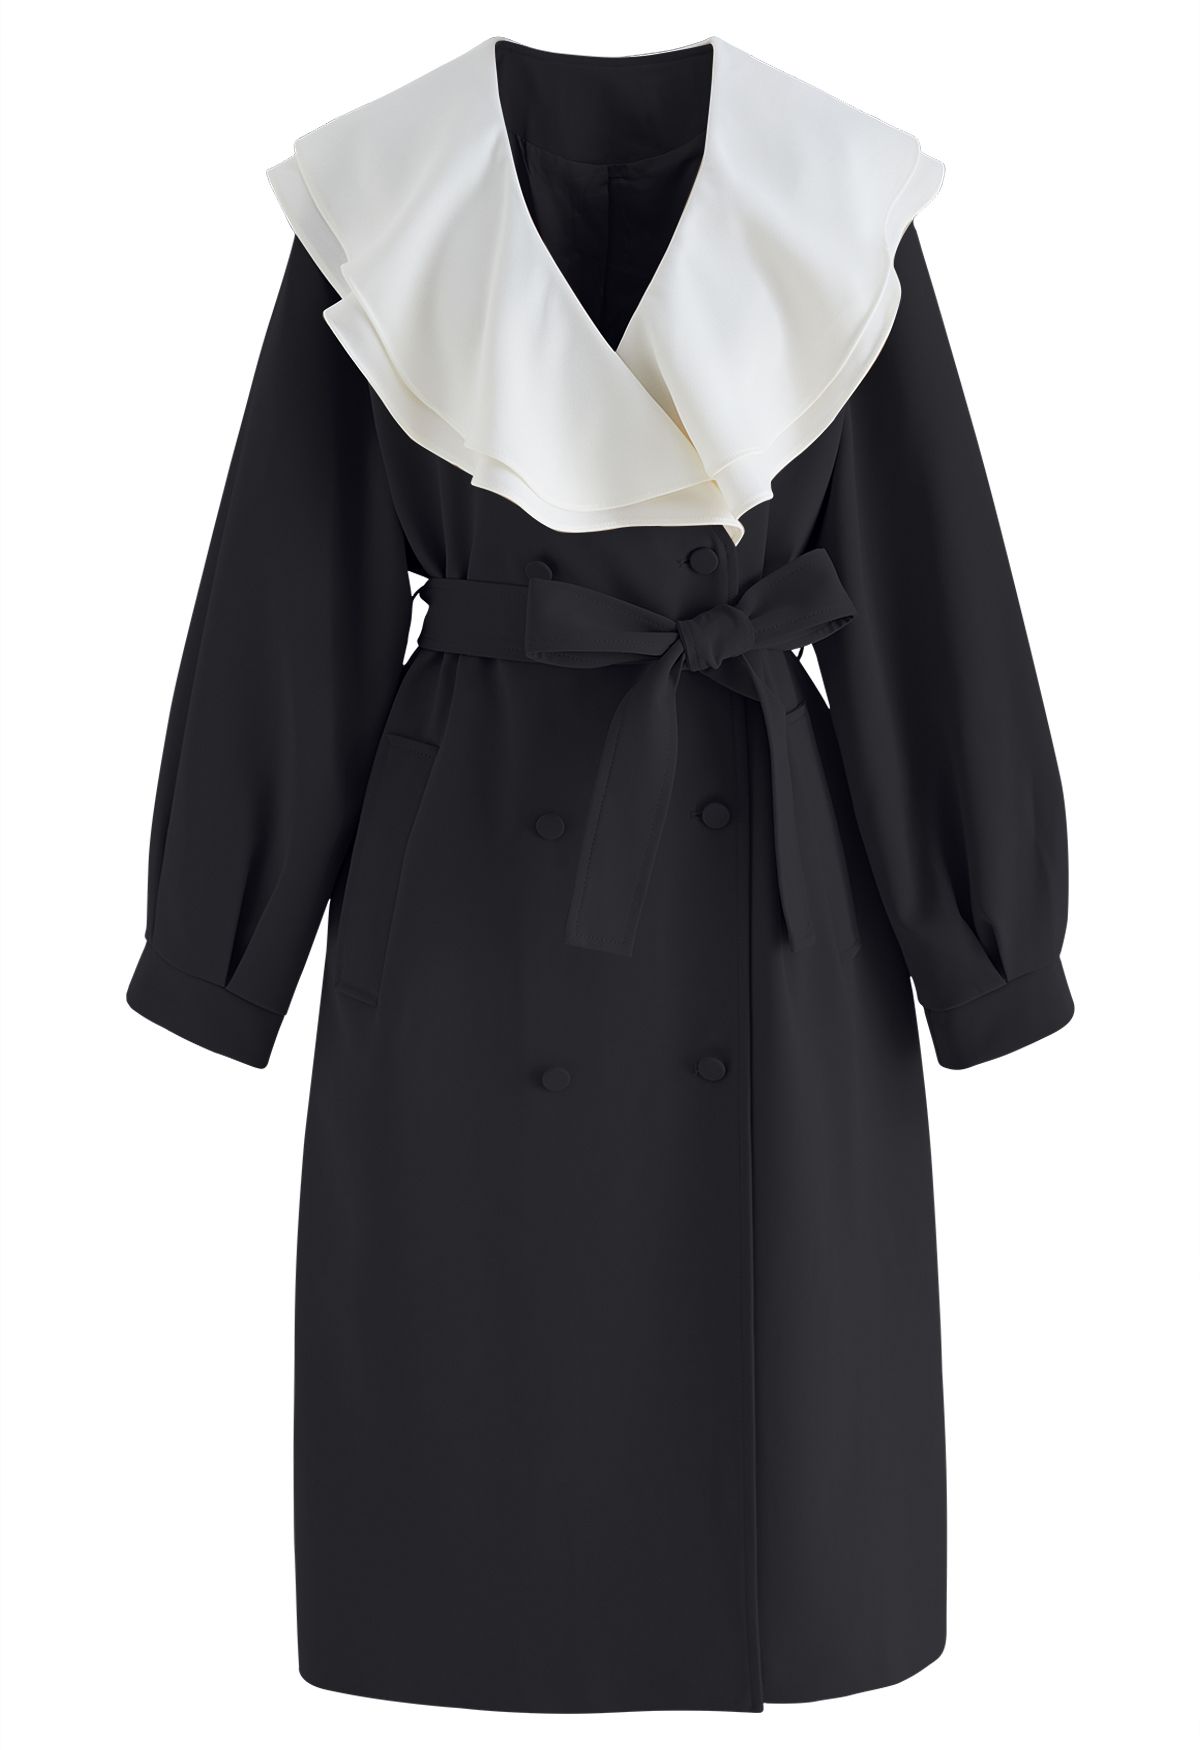 Ruffle Neck Double-Breasted Trench Dress in Black